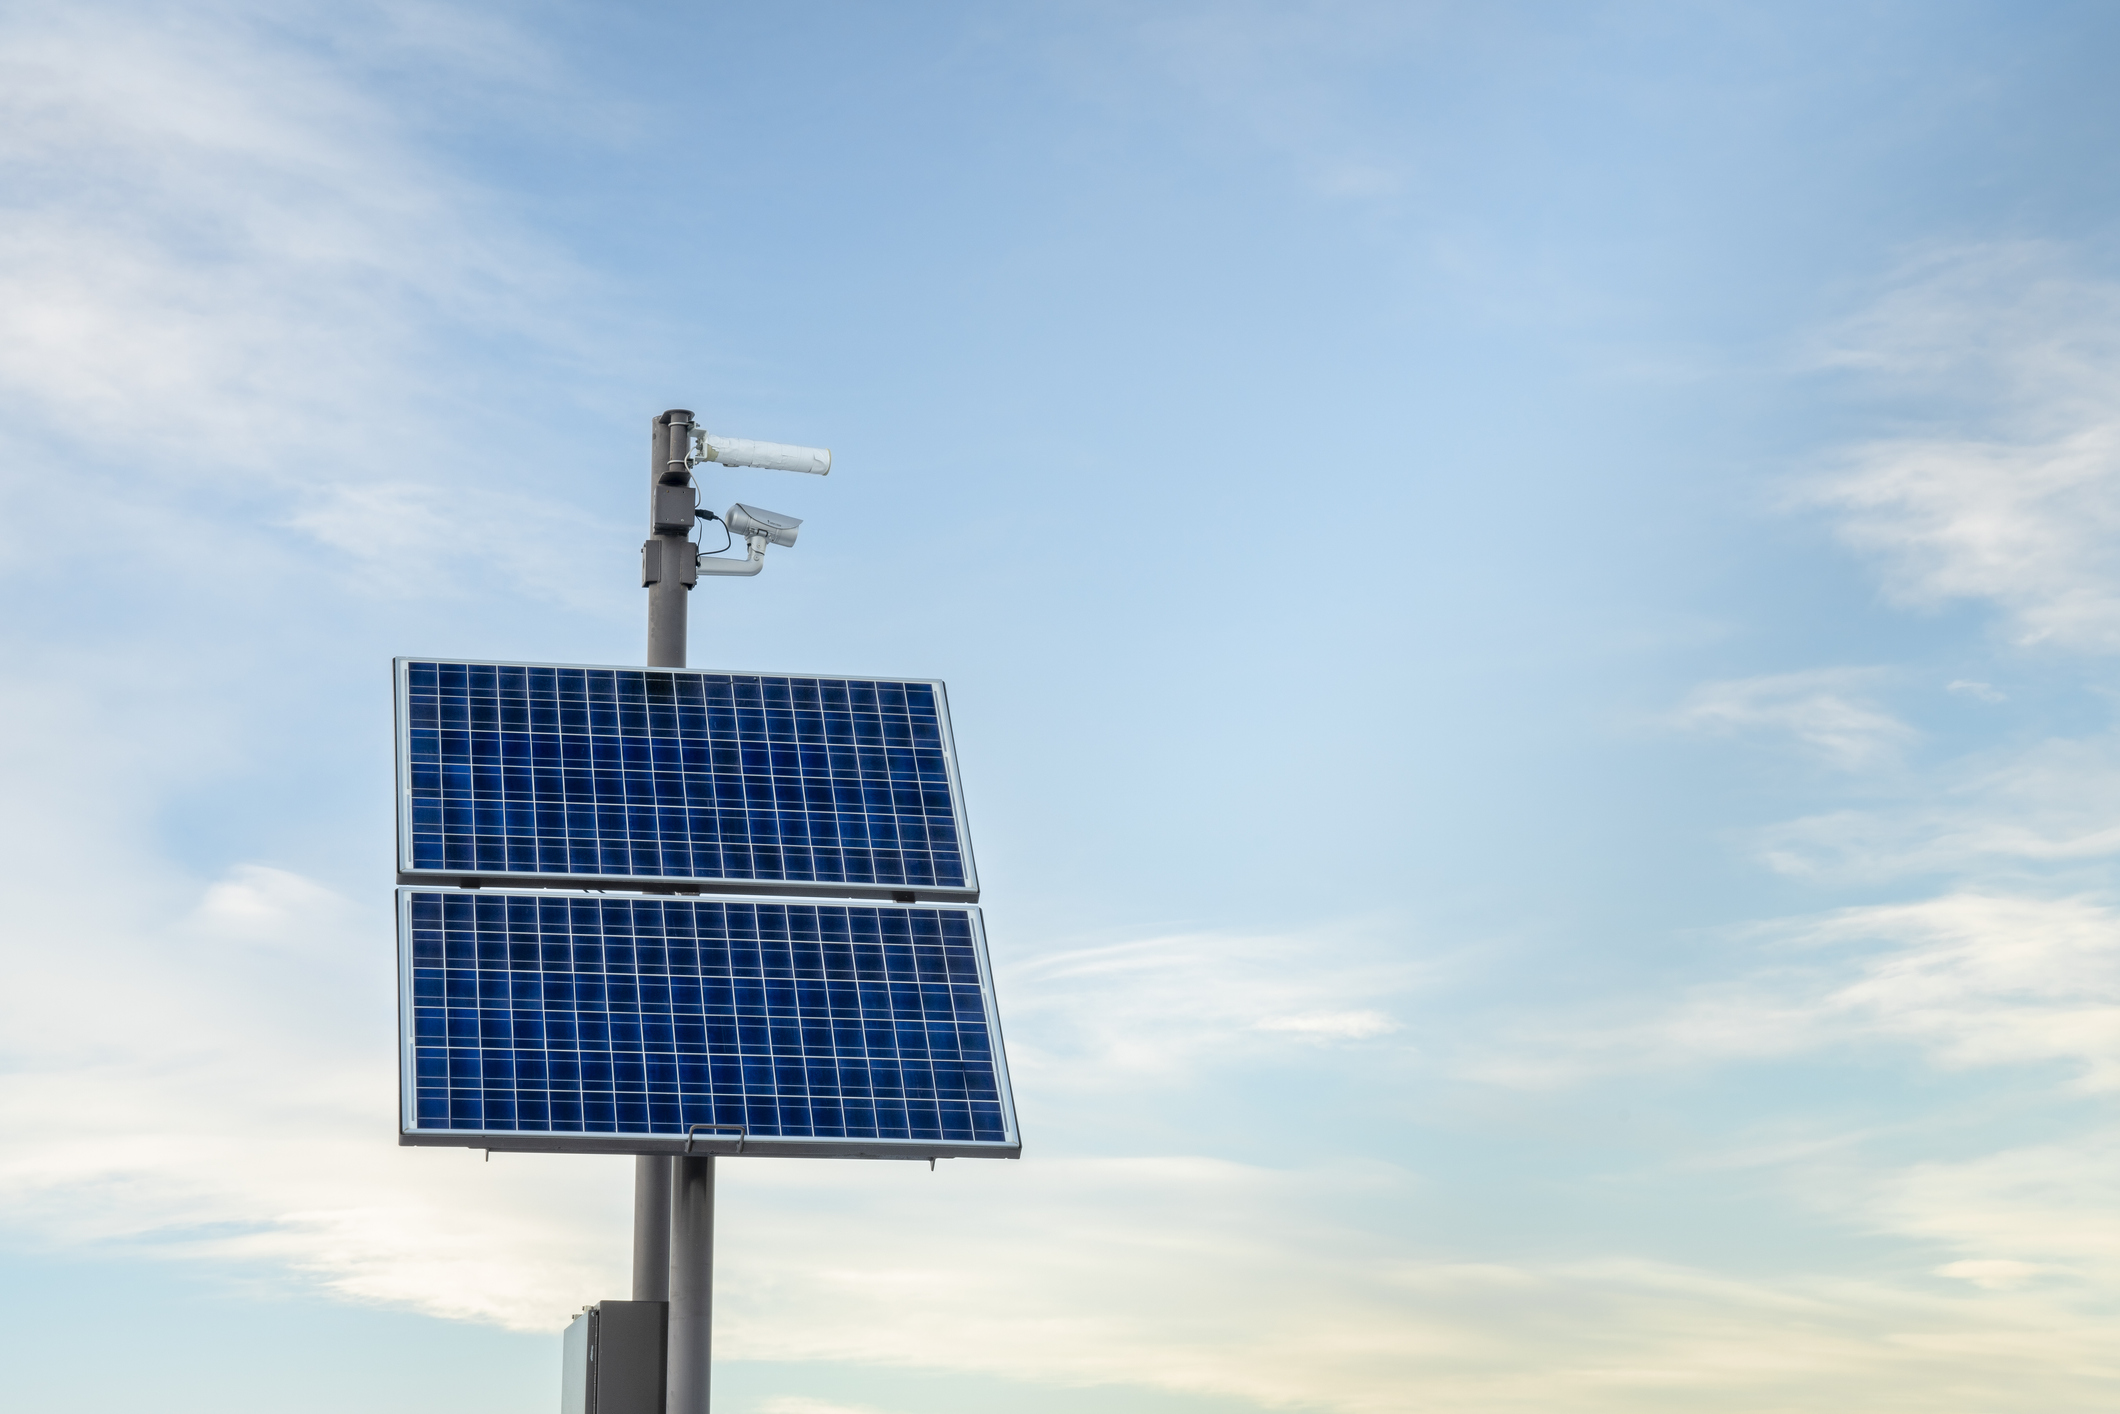 Security camera with solar panels 